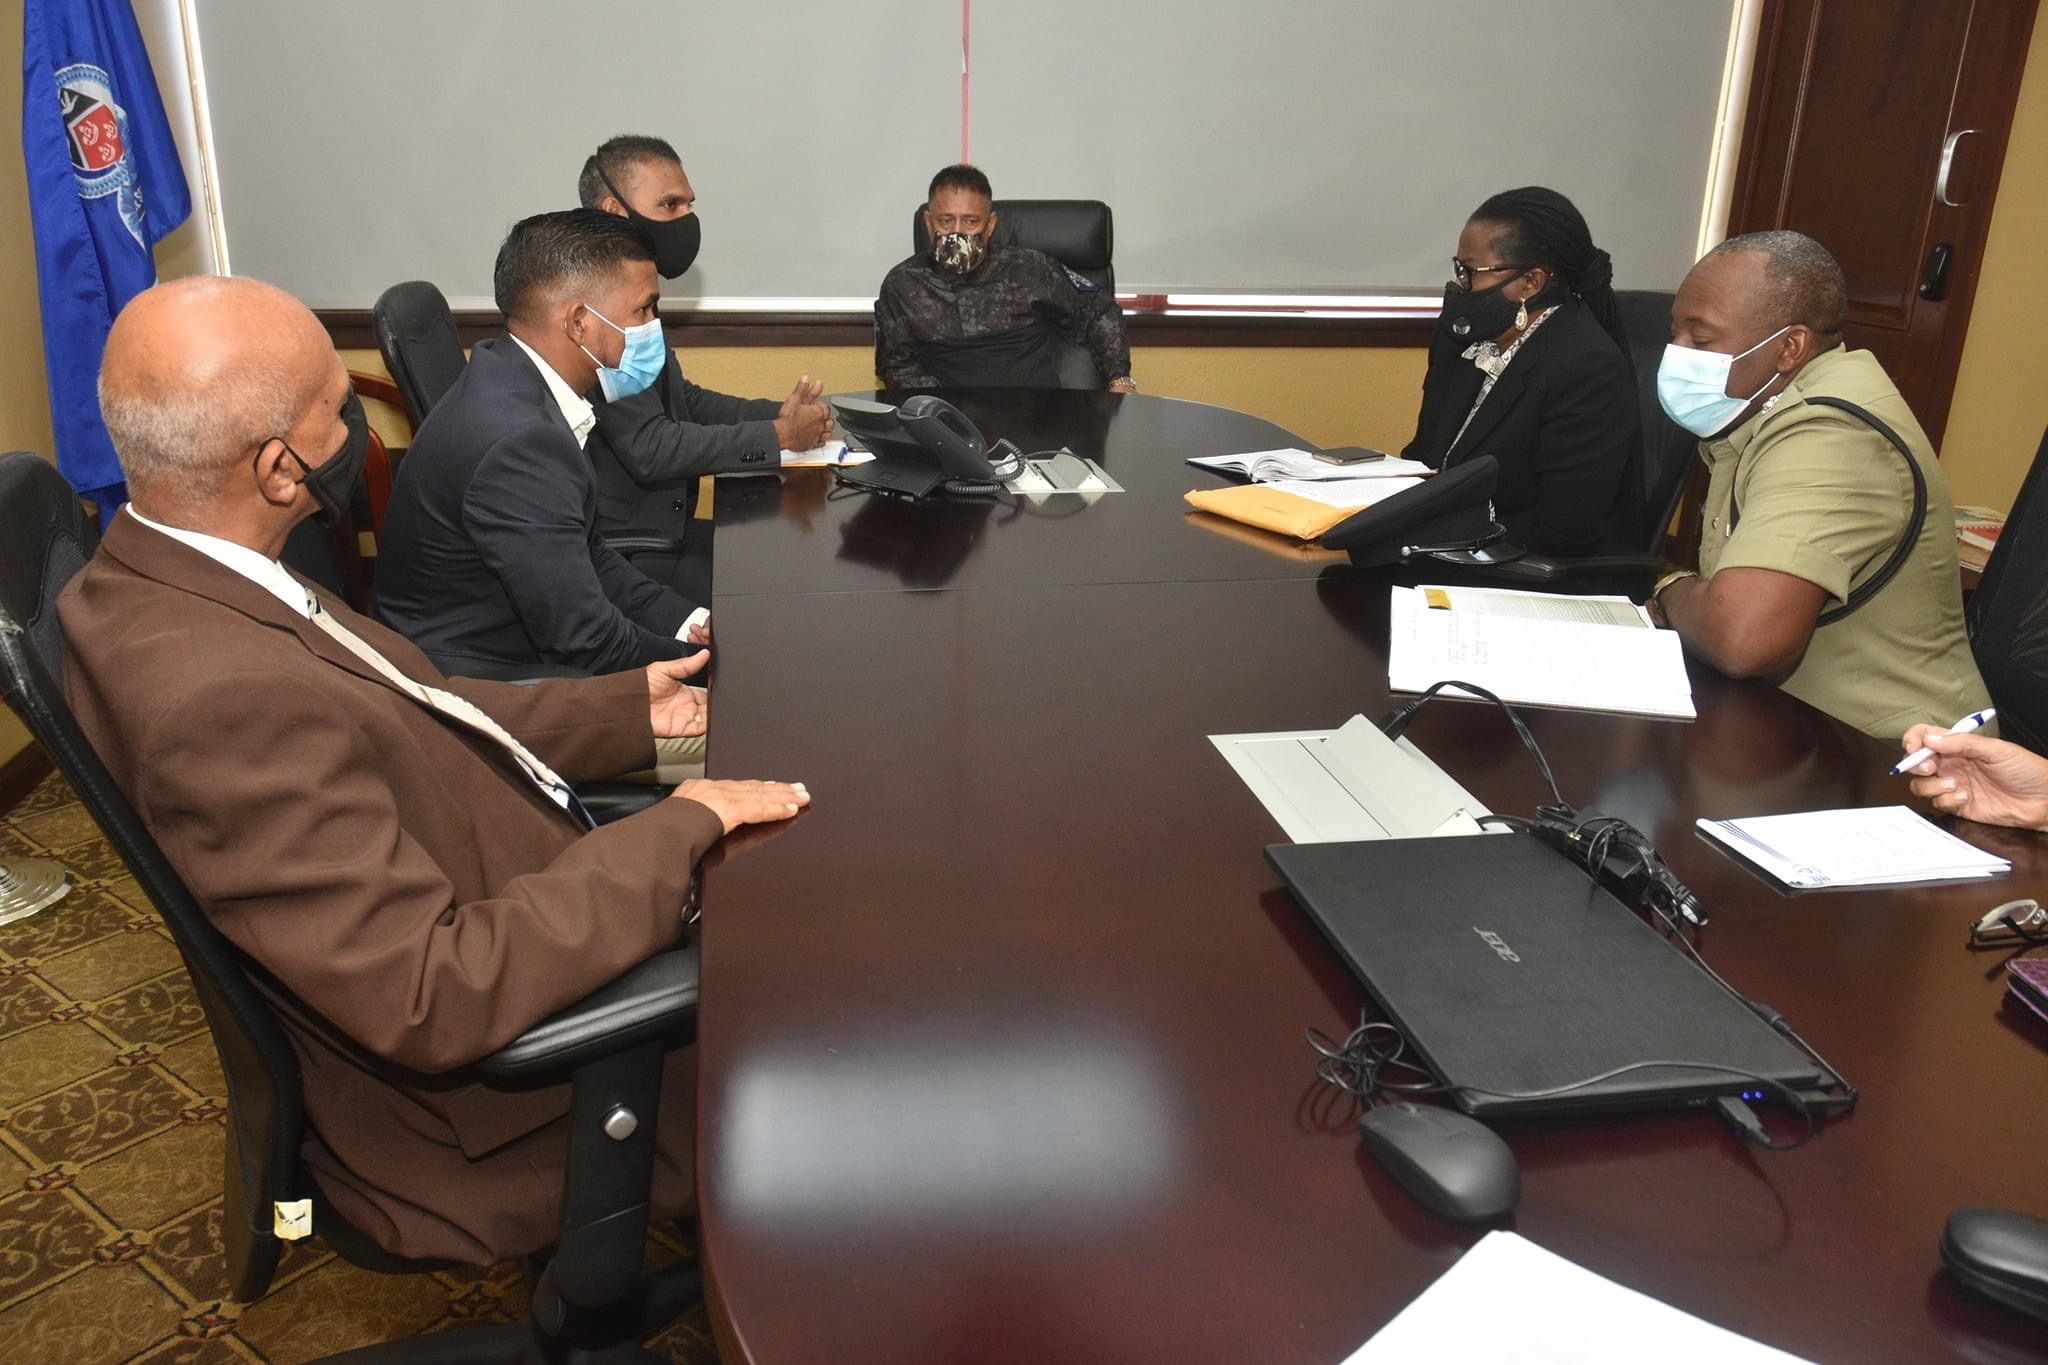 CoP met with the Chaguanas Mayor to discuss policing issues within the Borough